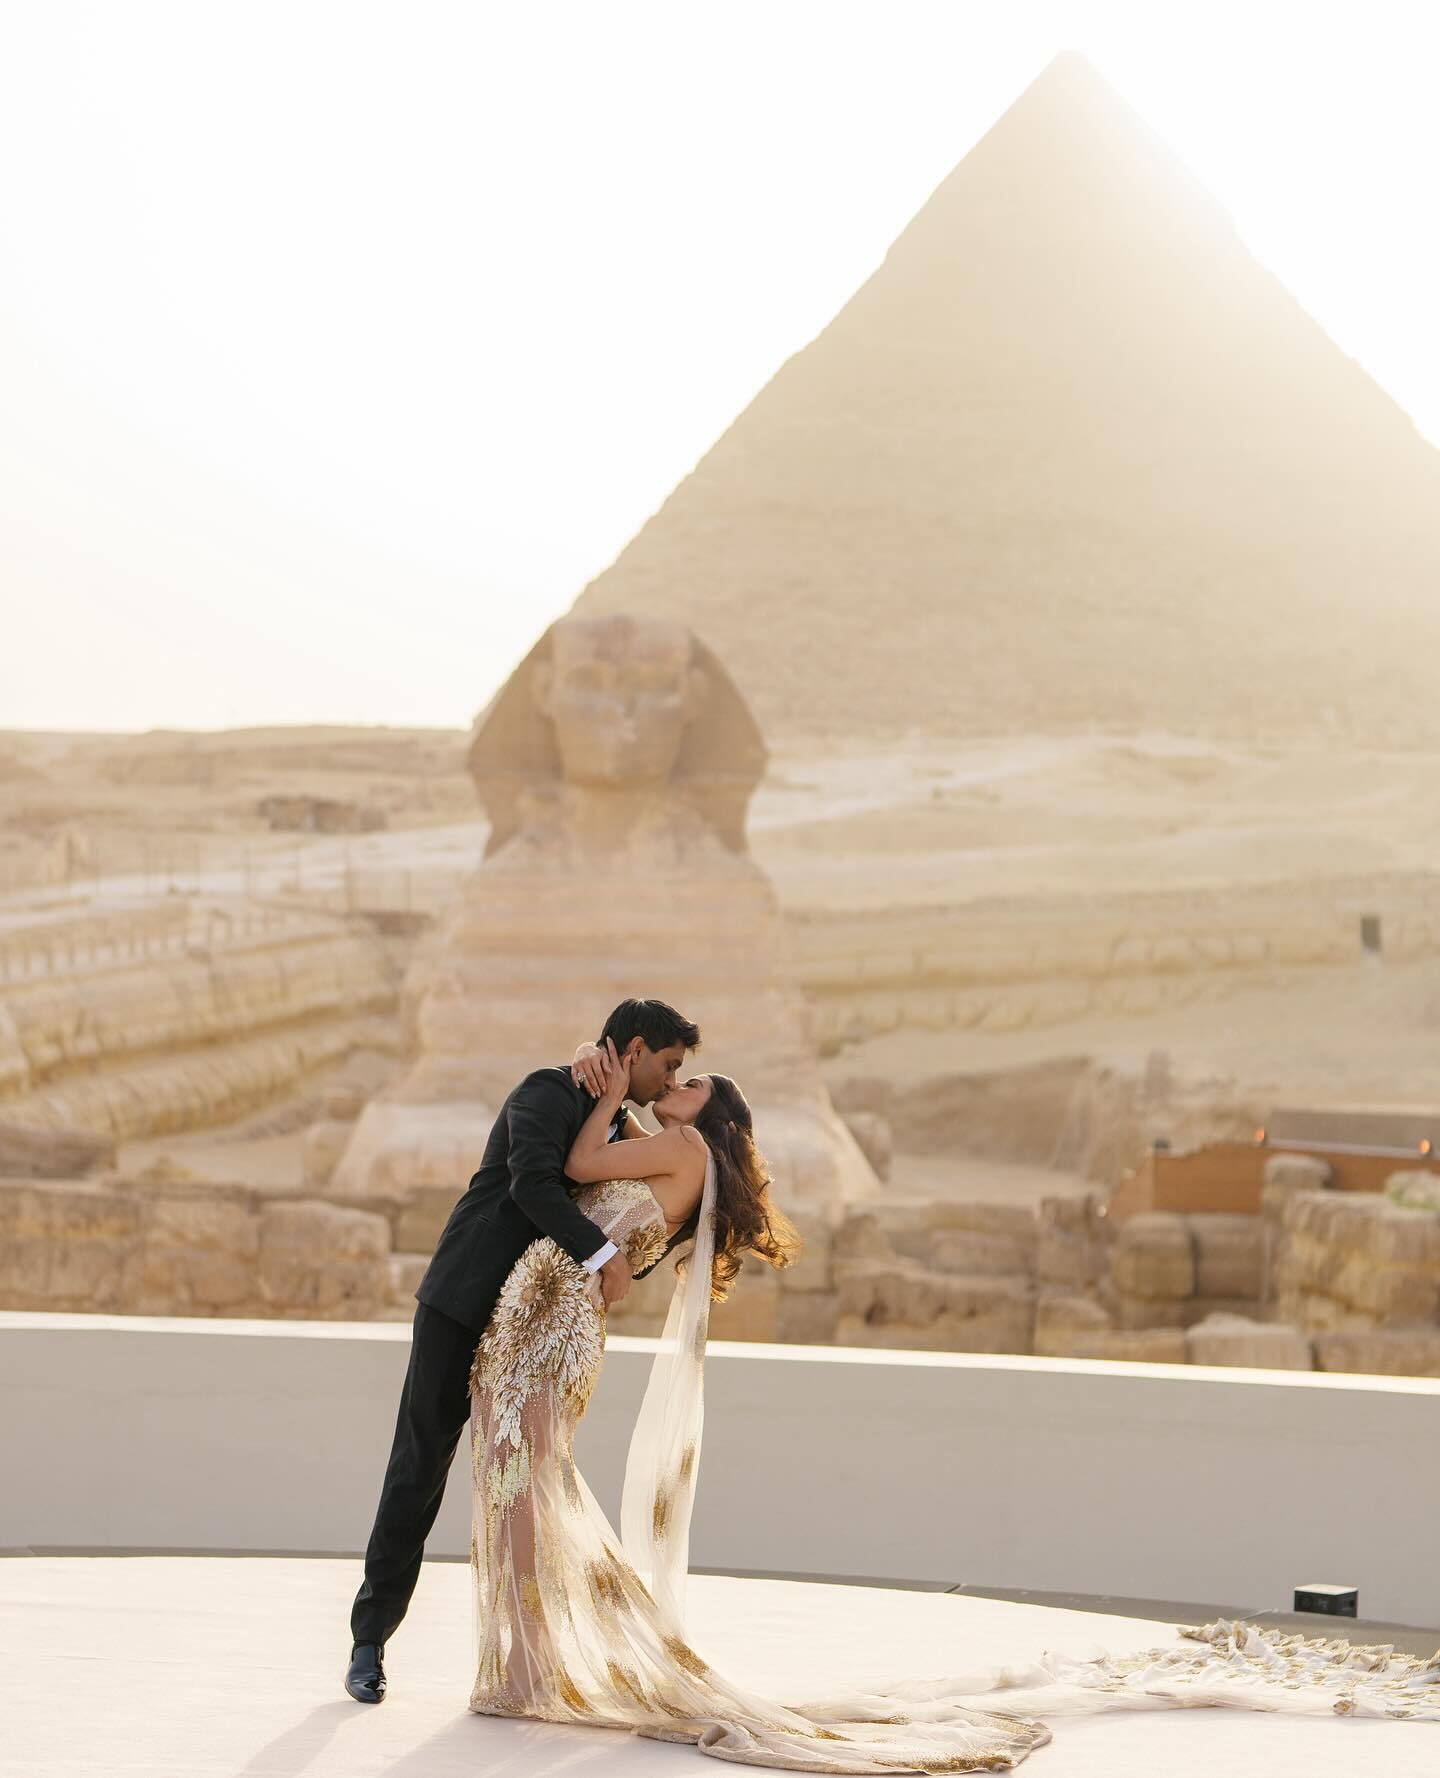 Could have been in space: American billionaire celebrates a lavish wedding at the foot of Egyptian pyramids